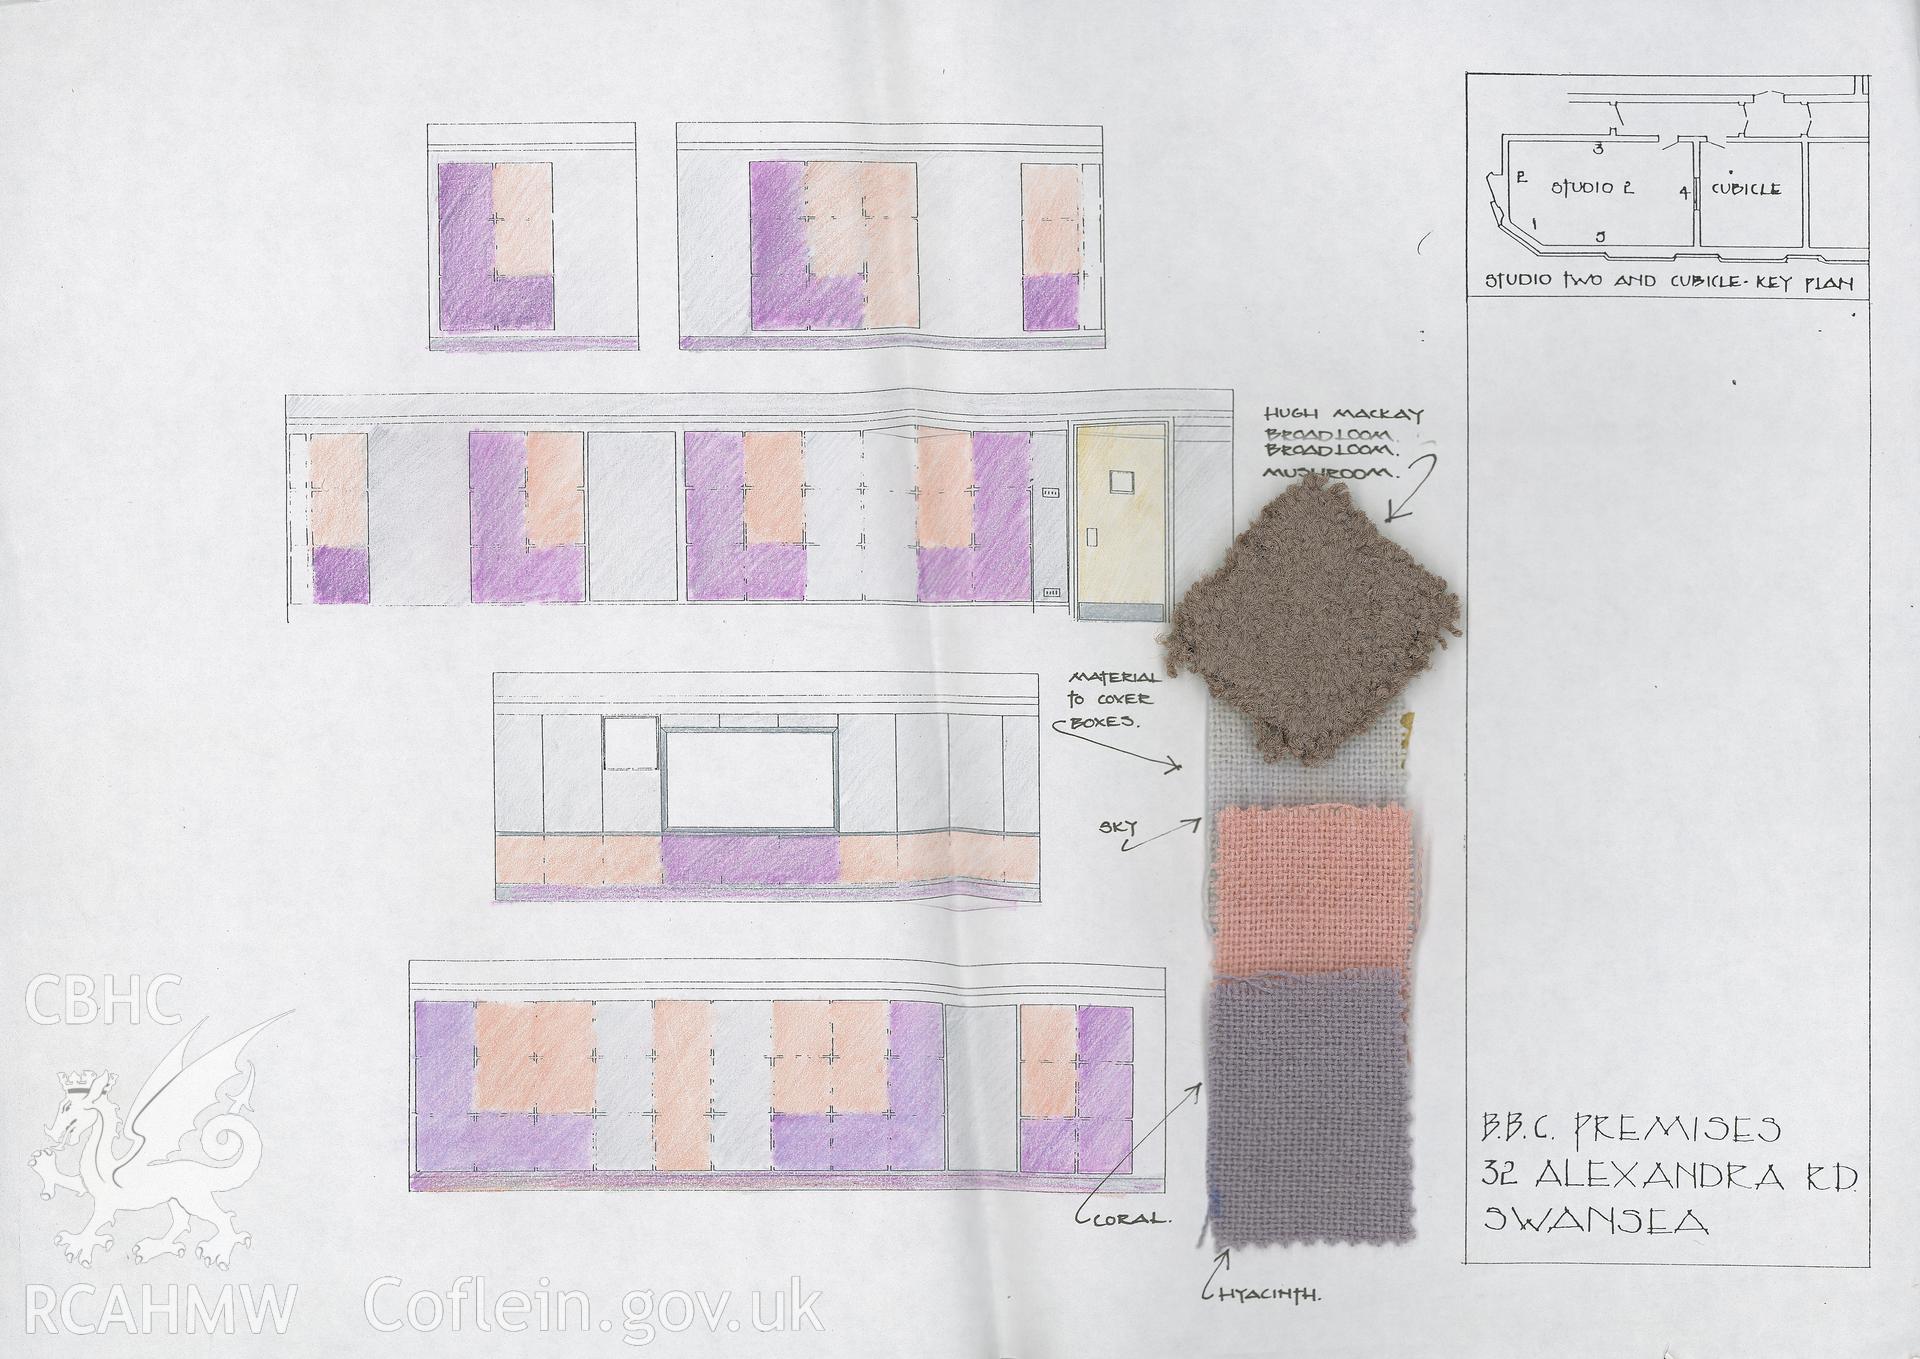 Swansea Broadcasting House, 32 Alexandra Road - BBC design and fabric swatches for studio 2 and cubicle key plan. Undated.